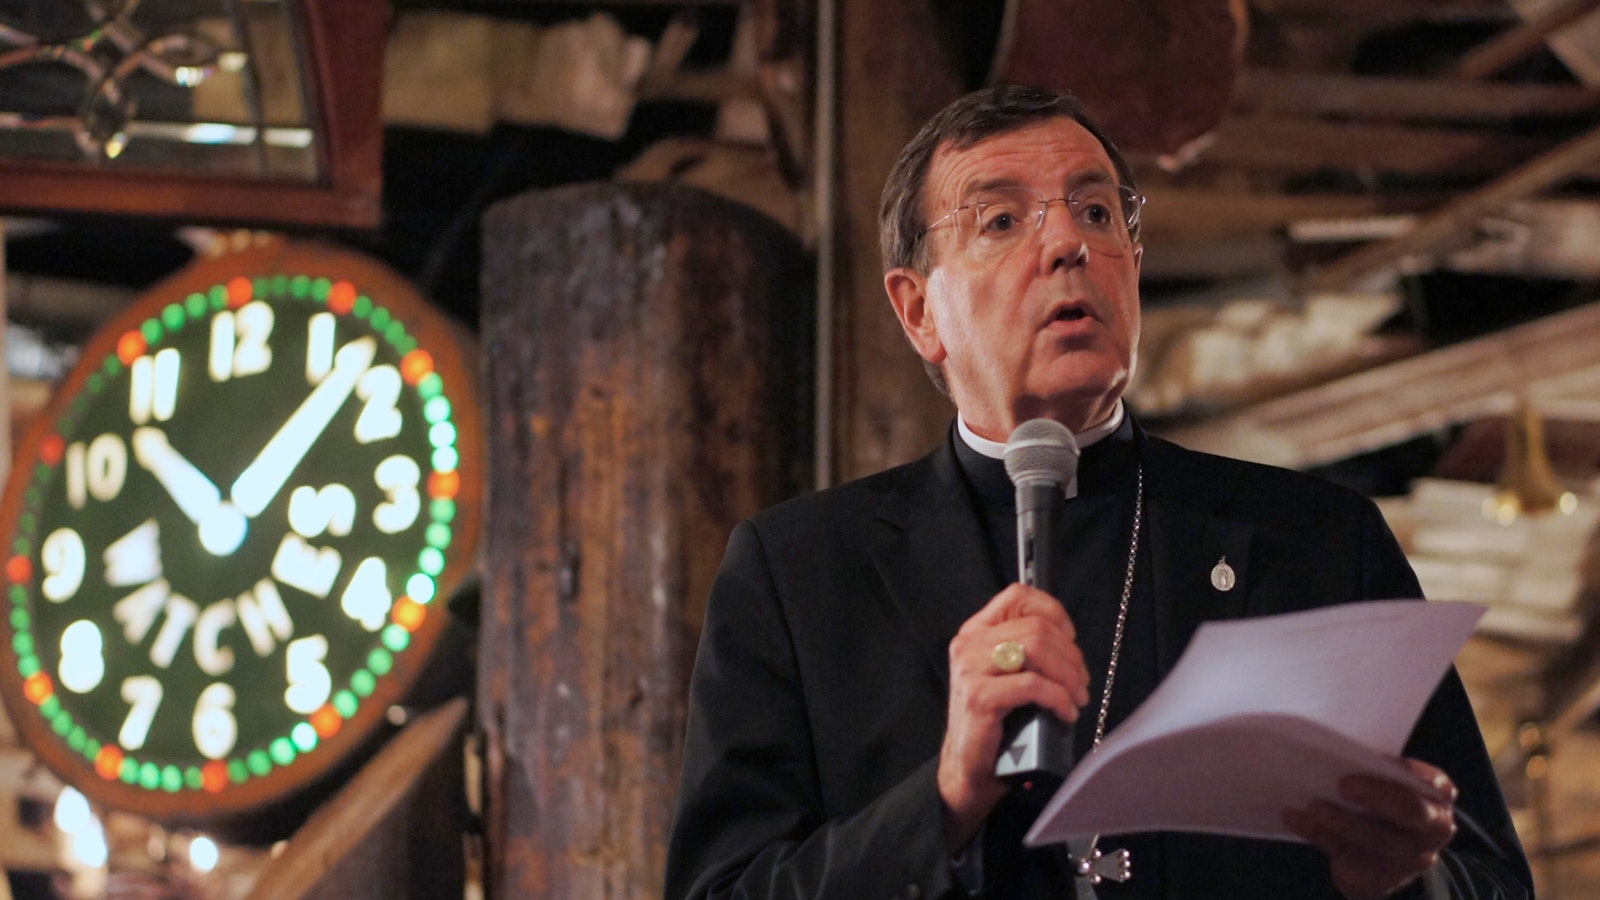 Archbishop Vigneron offers thoughts on practical ways to live the corporal and spiritual works of mercy during a Theology on Tap night April 8, 2015, at the Traffic Jam & Snug restaurant in Detroit. (Tim Hinkle | Detroit Catholic file photo)